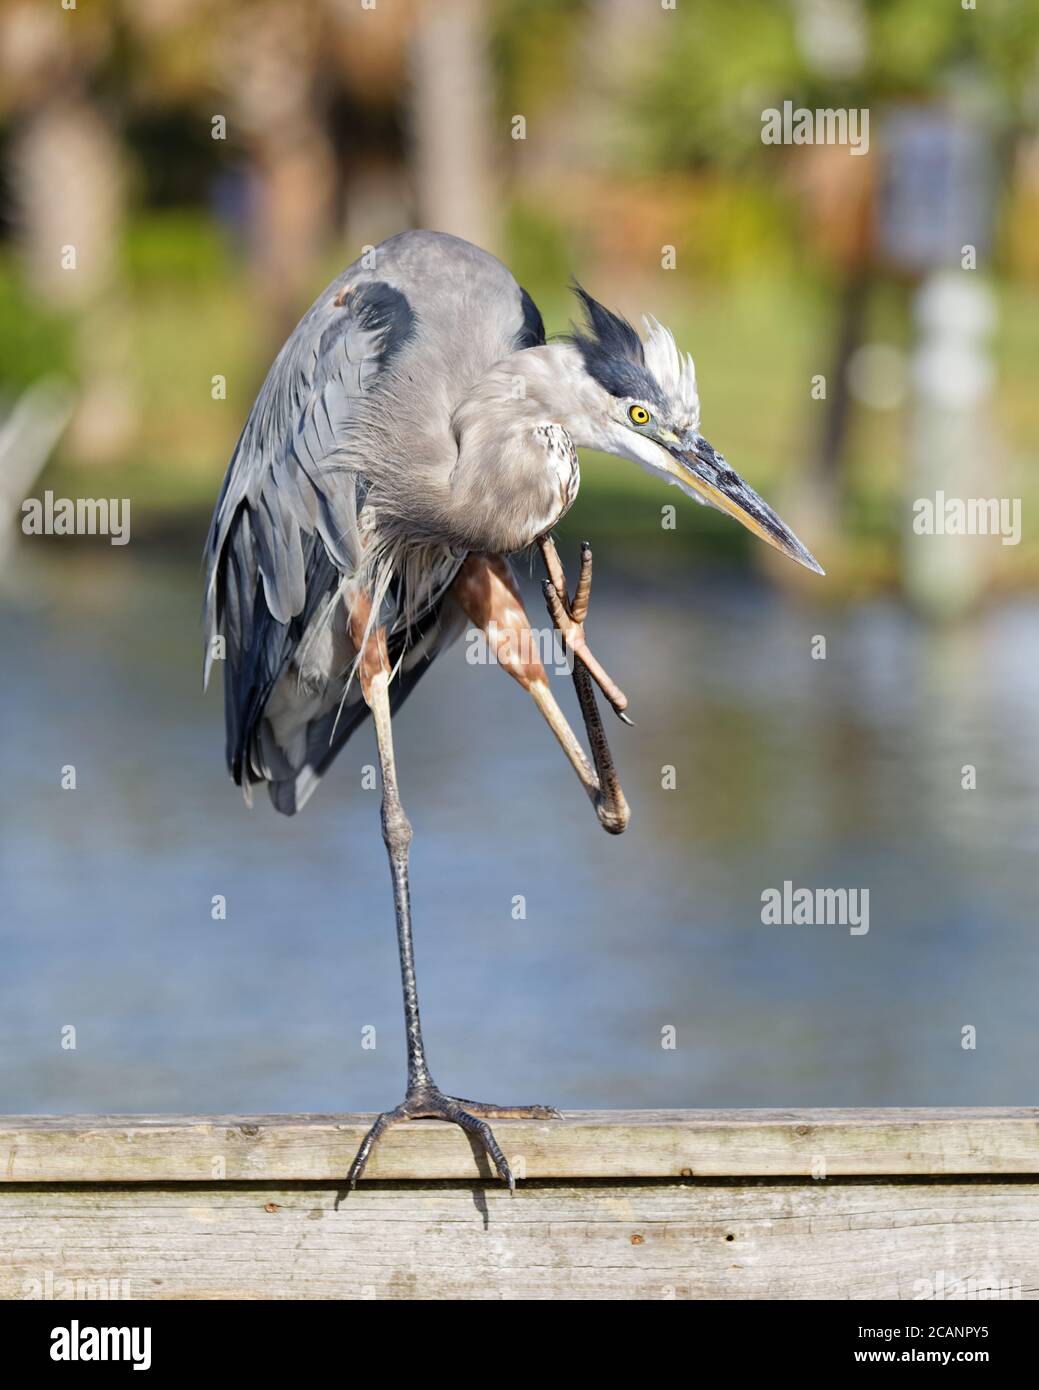 A beautiful Great Blue Heron (Ardea herodias) caught in a funny moment of scratching himself. Stock Photo